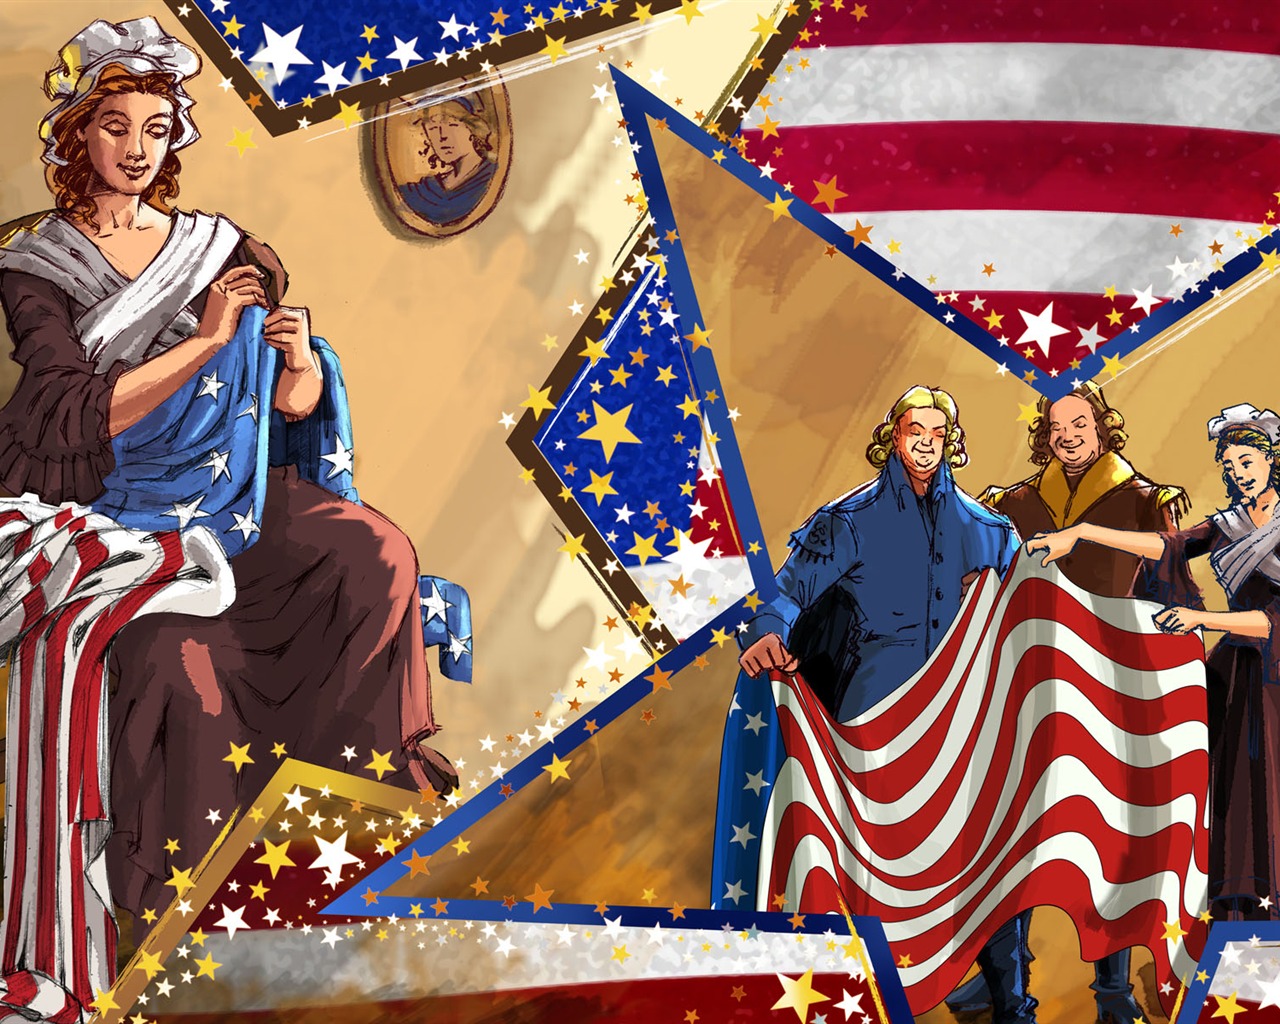 U.S. Independence Day theme wallpaper #10 - 1280x1024